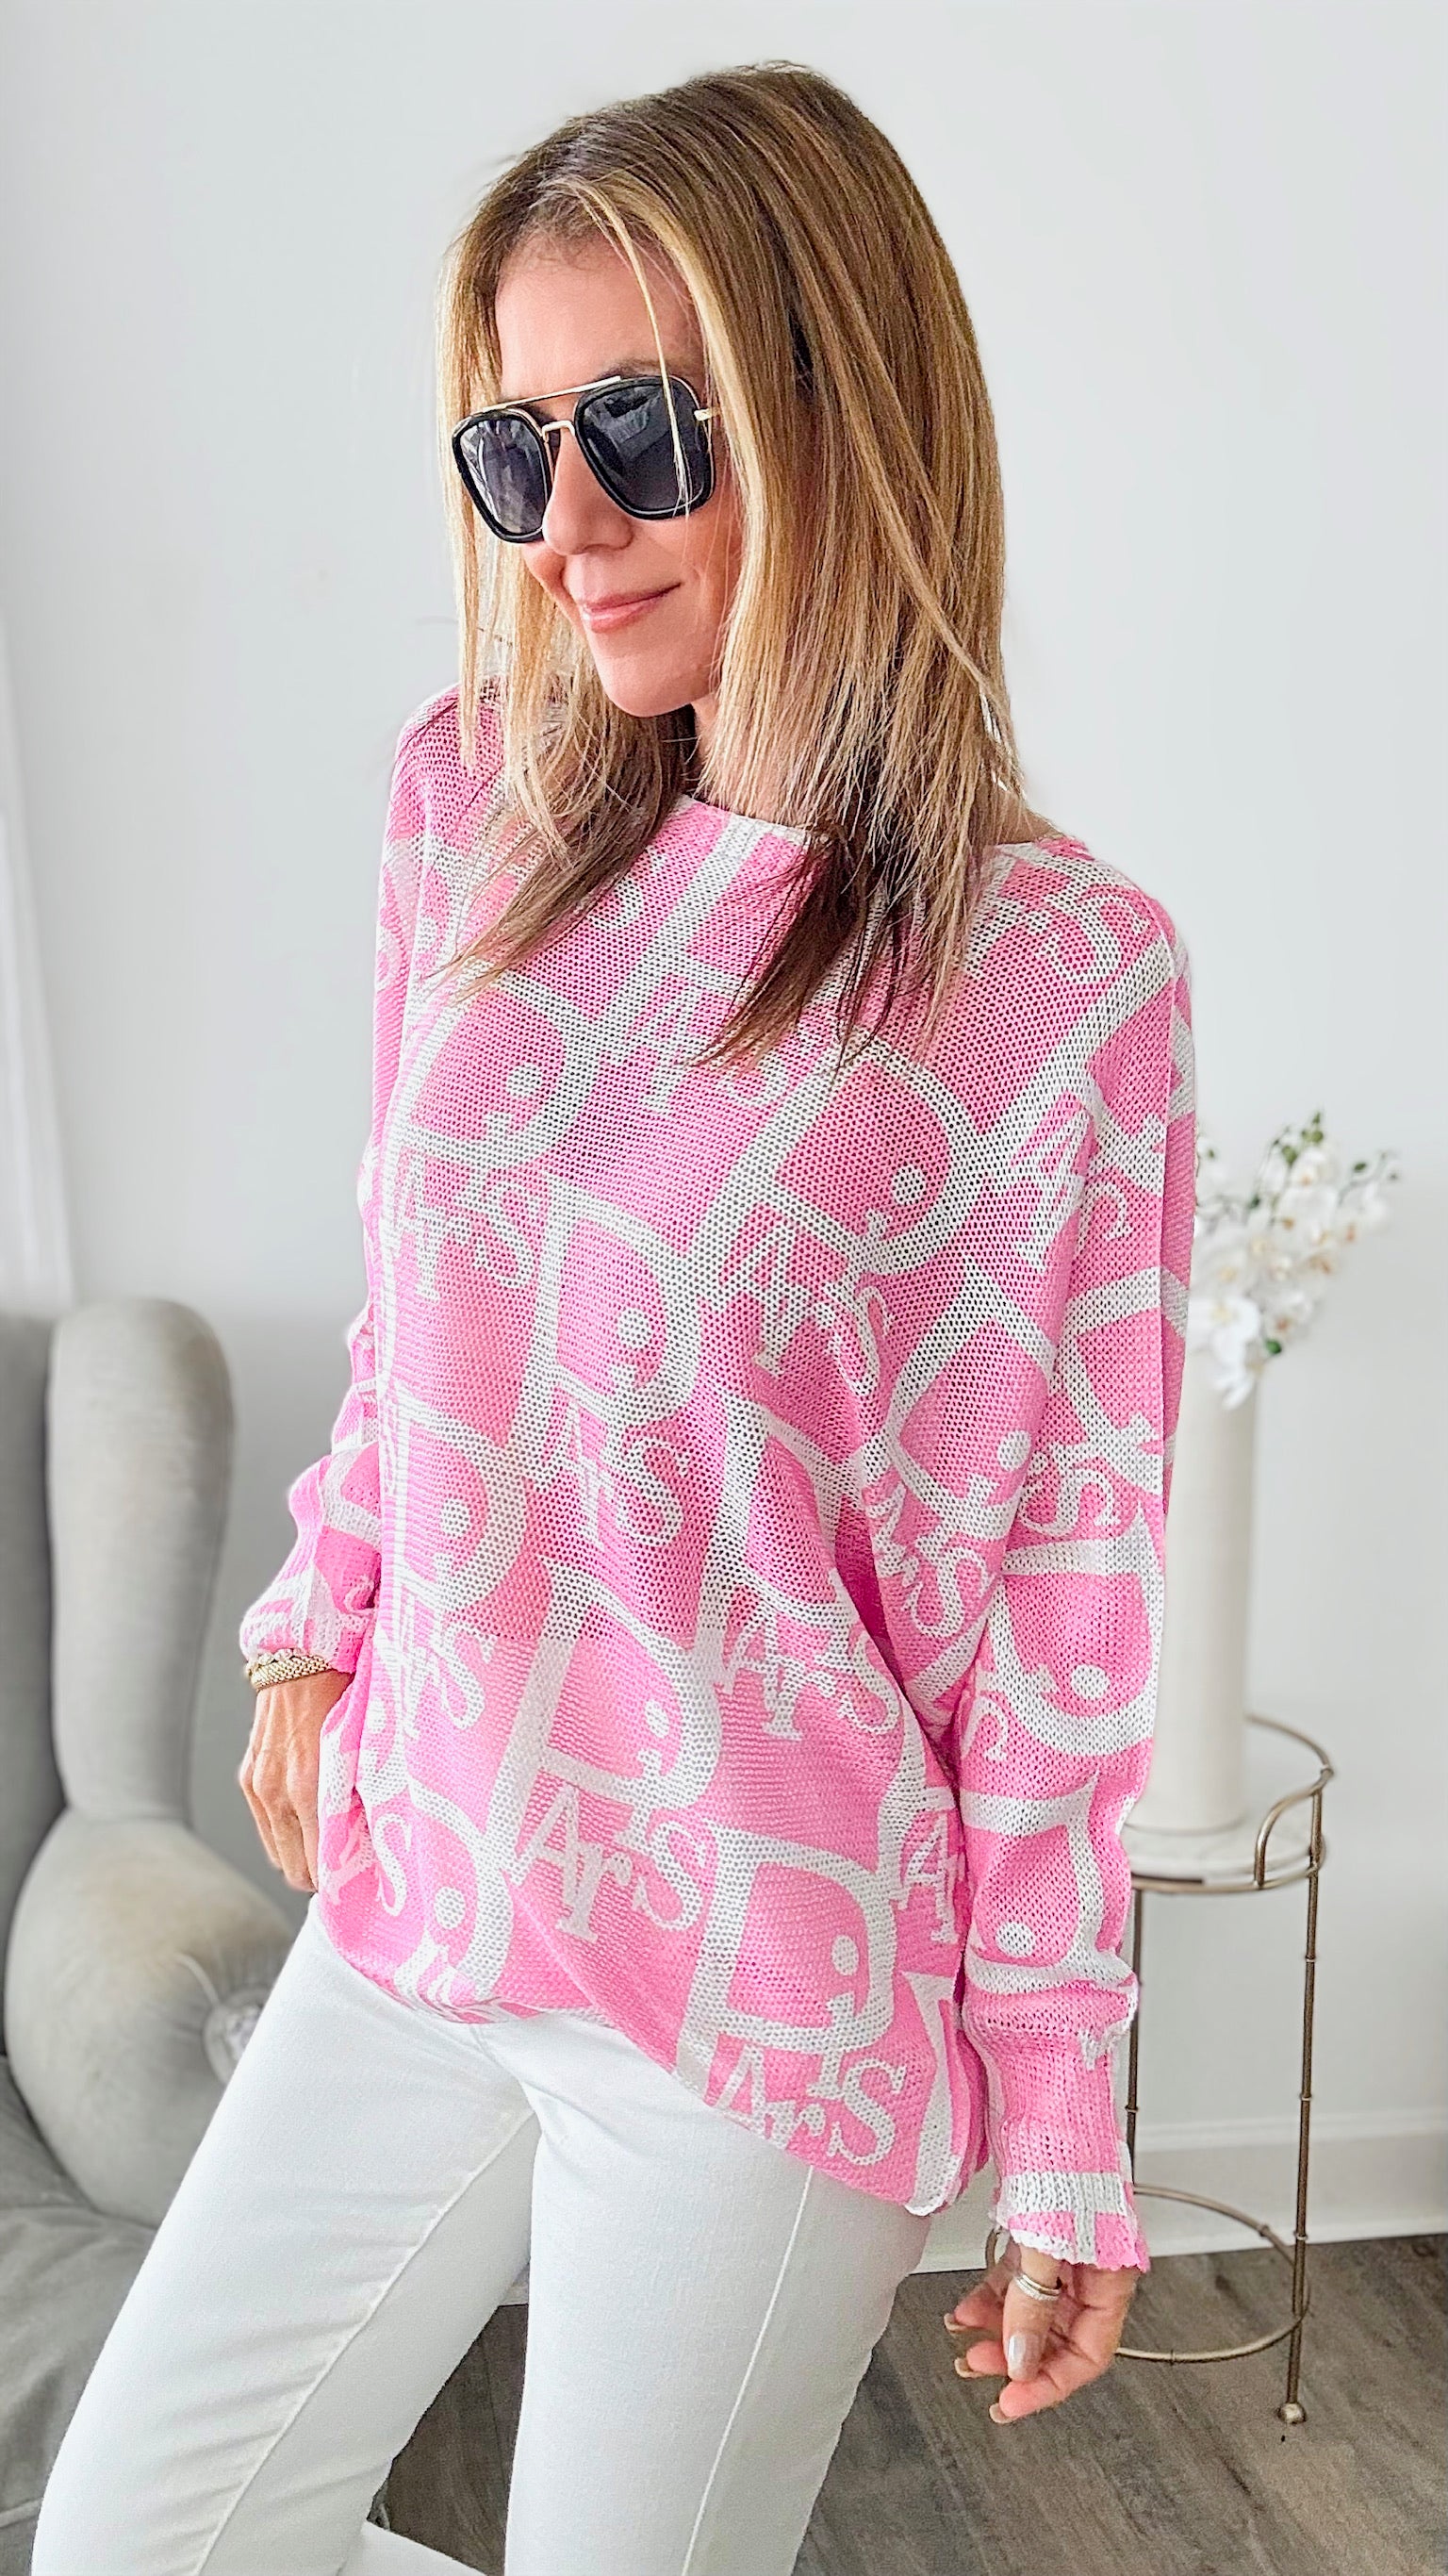 Eiffel Elegance Italian St Tropez Sweater - Pink-140 Sweaters-Germany-Coastal Bloom Boutique, find the trendiest versions of the popular styles and looks Located in Indialantic, FL